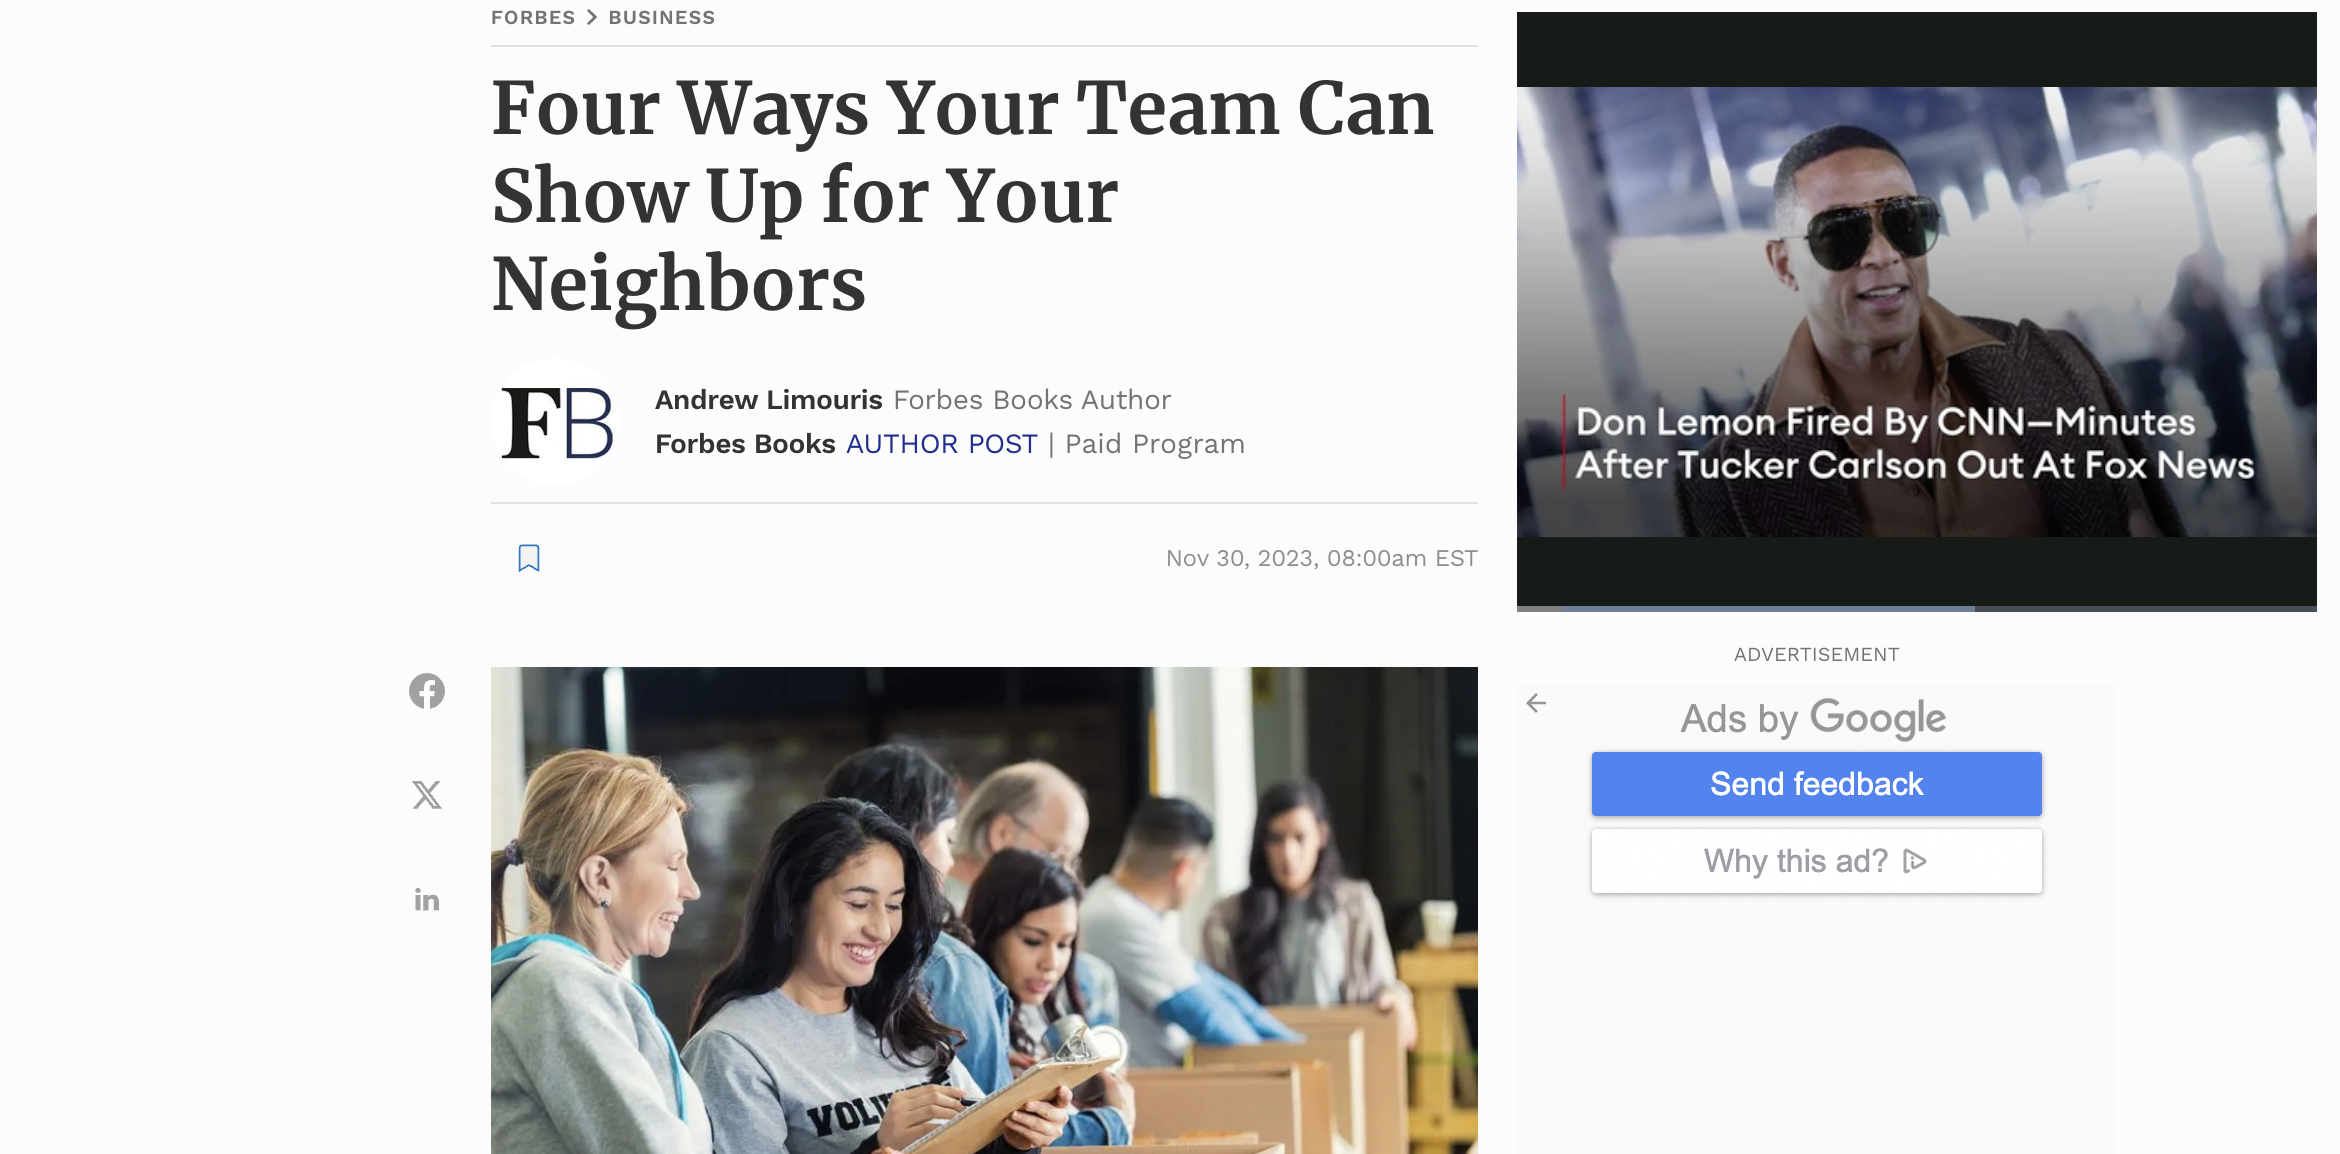 Forbes: Four Ways Your Team Can Show Up for Your Neighbors